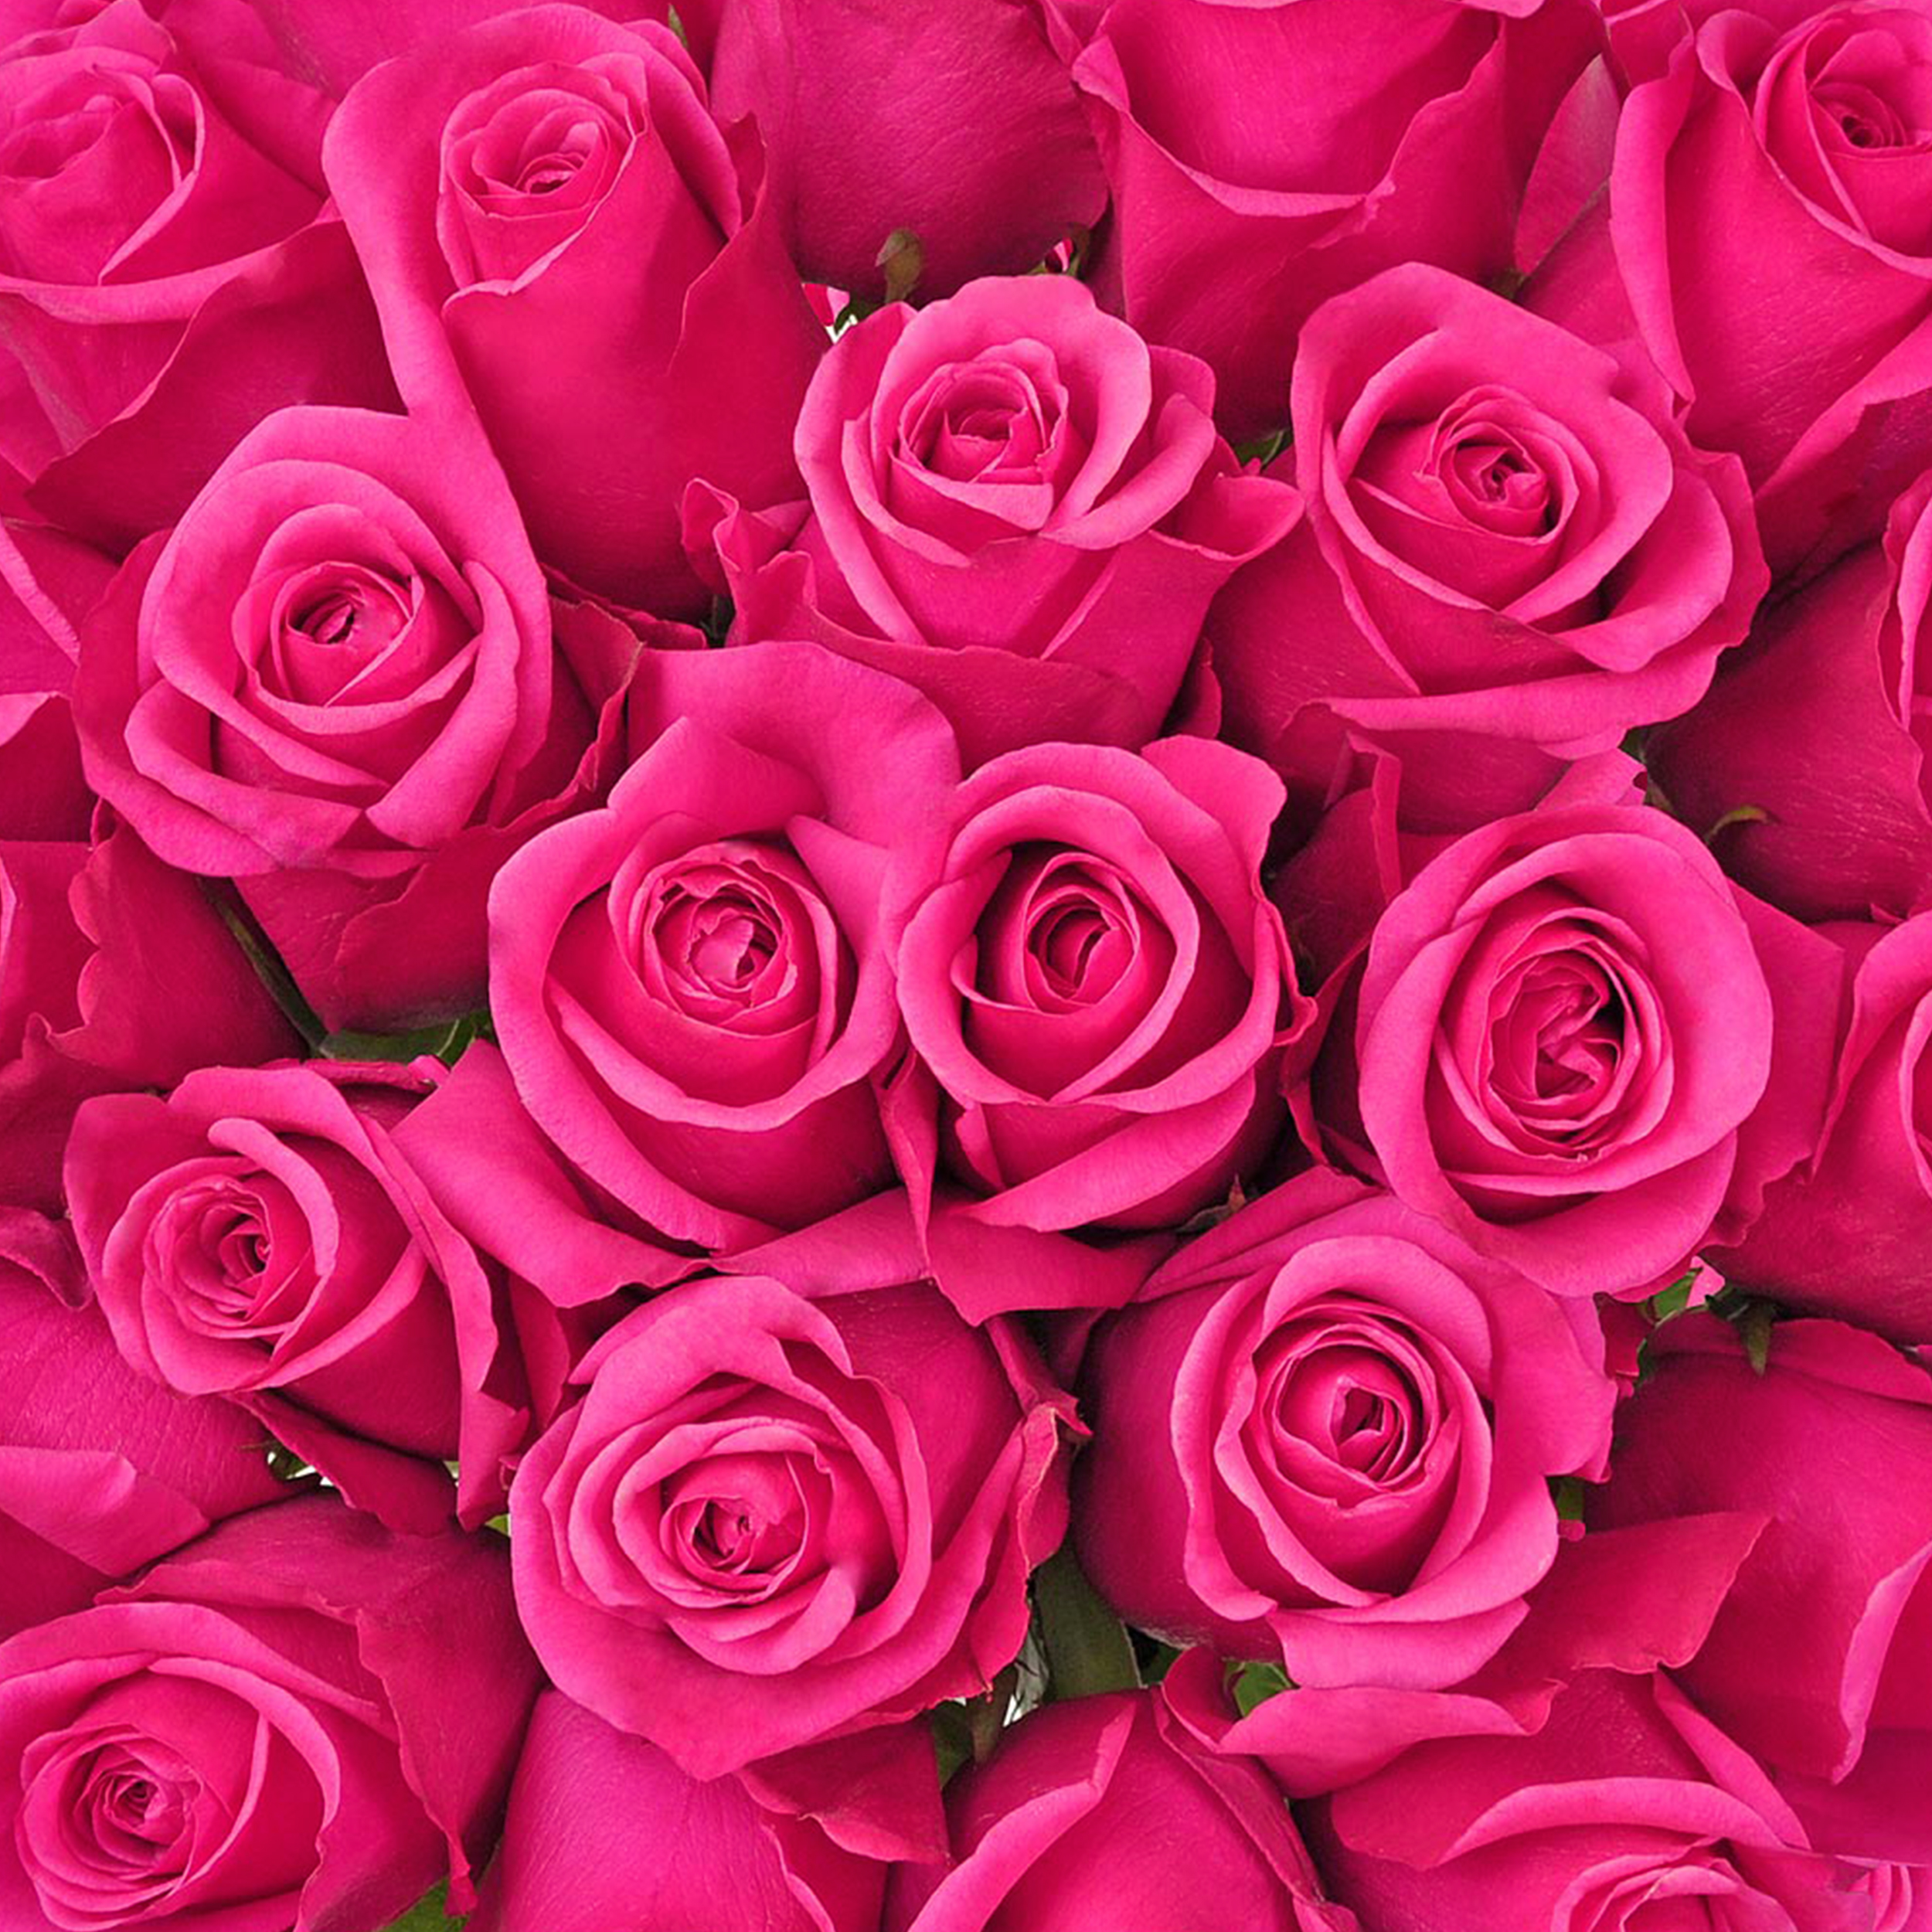 Hot Pink Roses - Farm Direct Fresh Cut Flowers - 50 Stems - Roses -by Bloomingmore - image 3 of 7